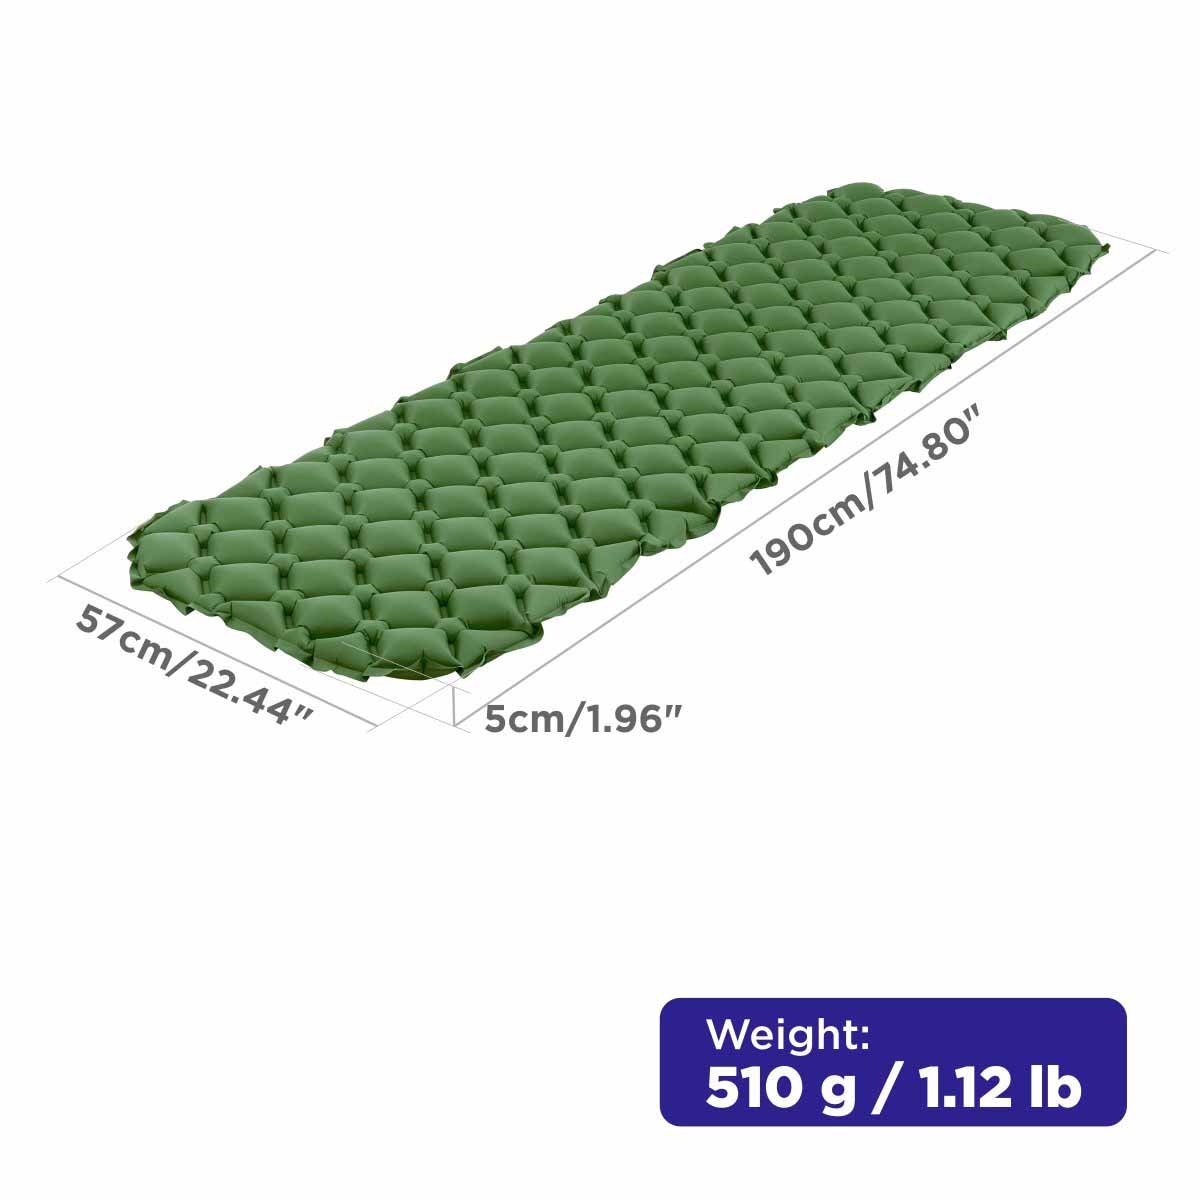 2-inch Waterproof Camping Self Inflating Sleeping is 2 inches thick, 74.8 inches long and 22.44 inches wide. It is extreme;y lightweight - only 1.12 lbs!